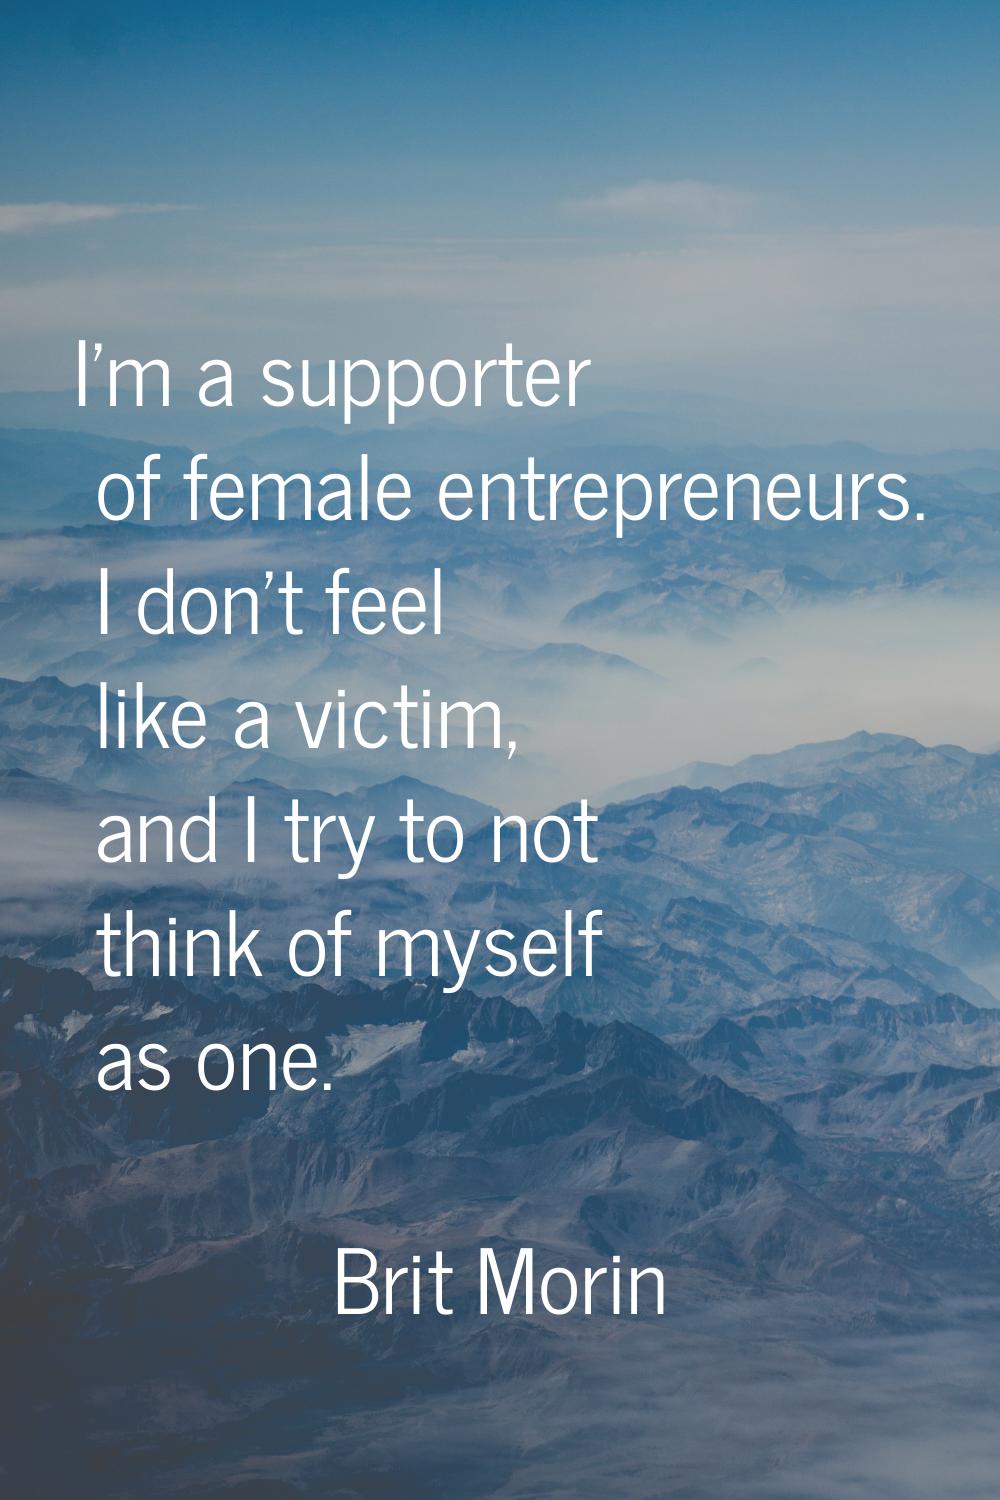 I'm a supporter of female entrepreneurs. I don't feel like a victim, and I try to not think of myse